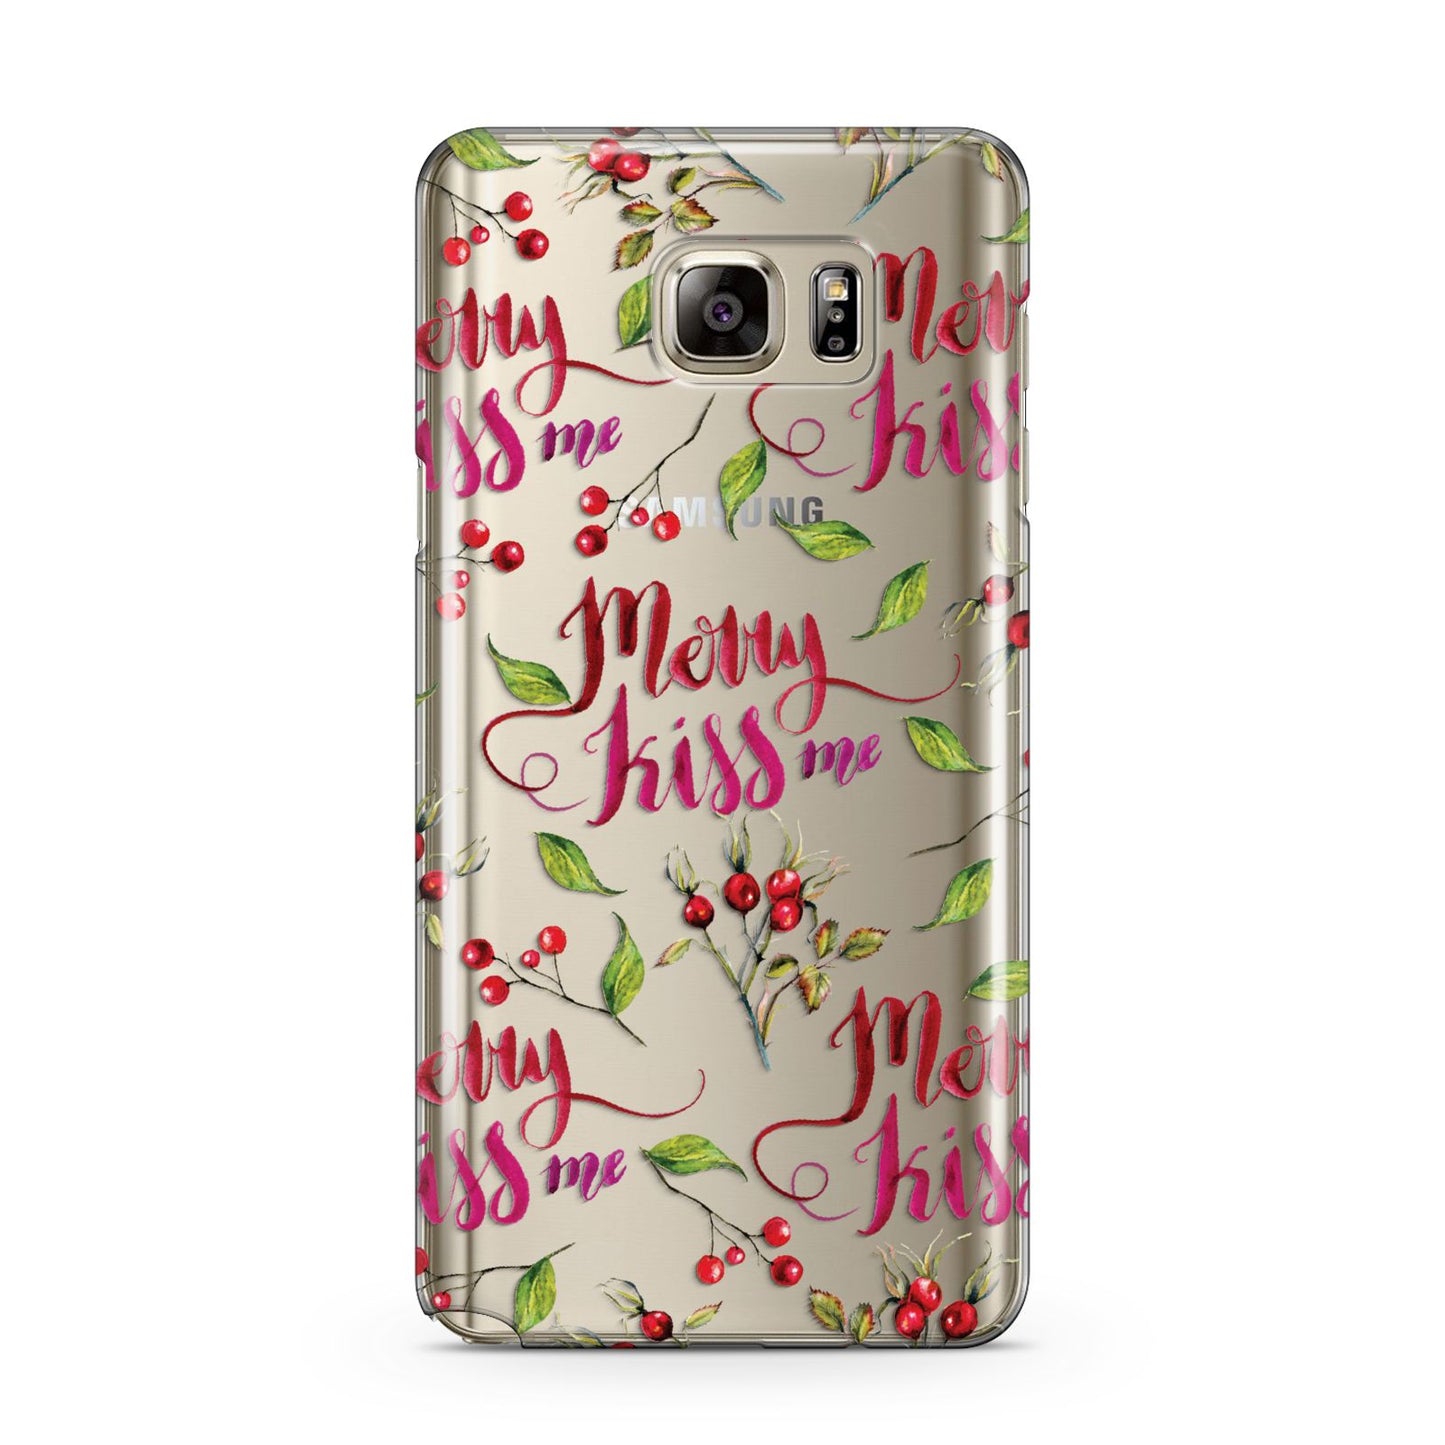 Merry kiss me Samsung Galaxy Note 5 Case